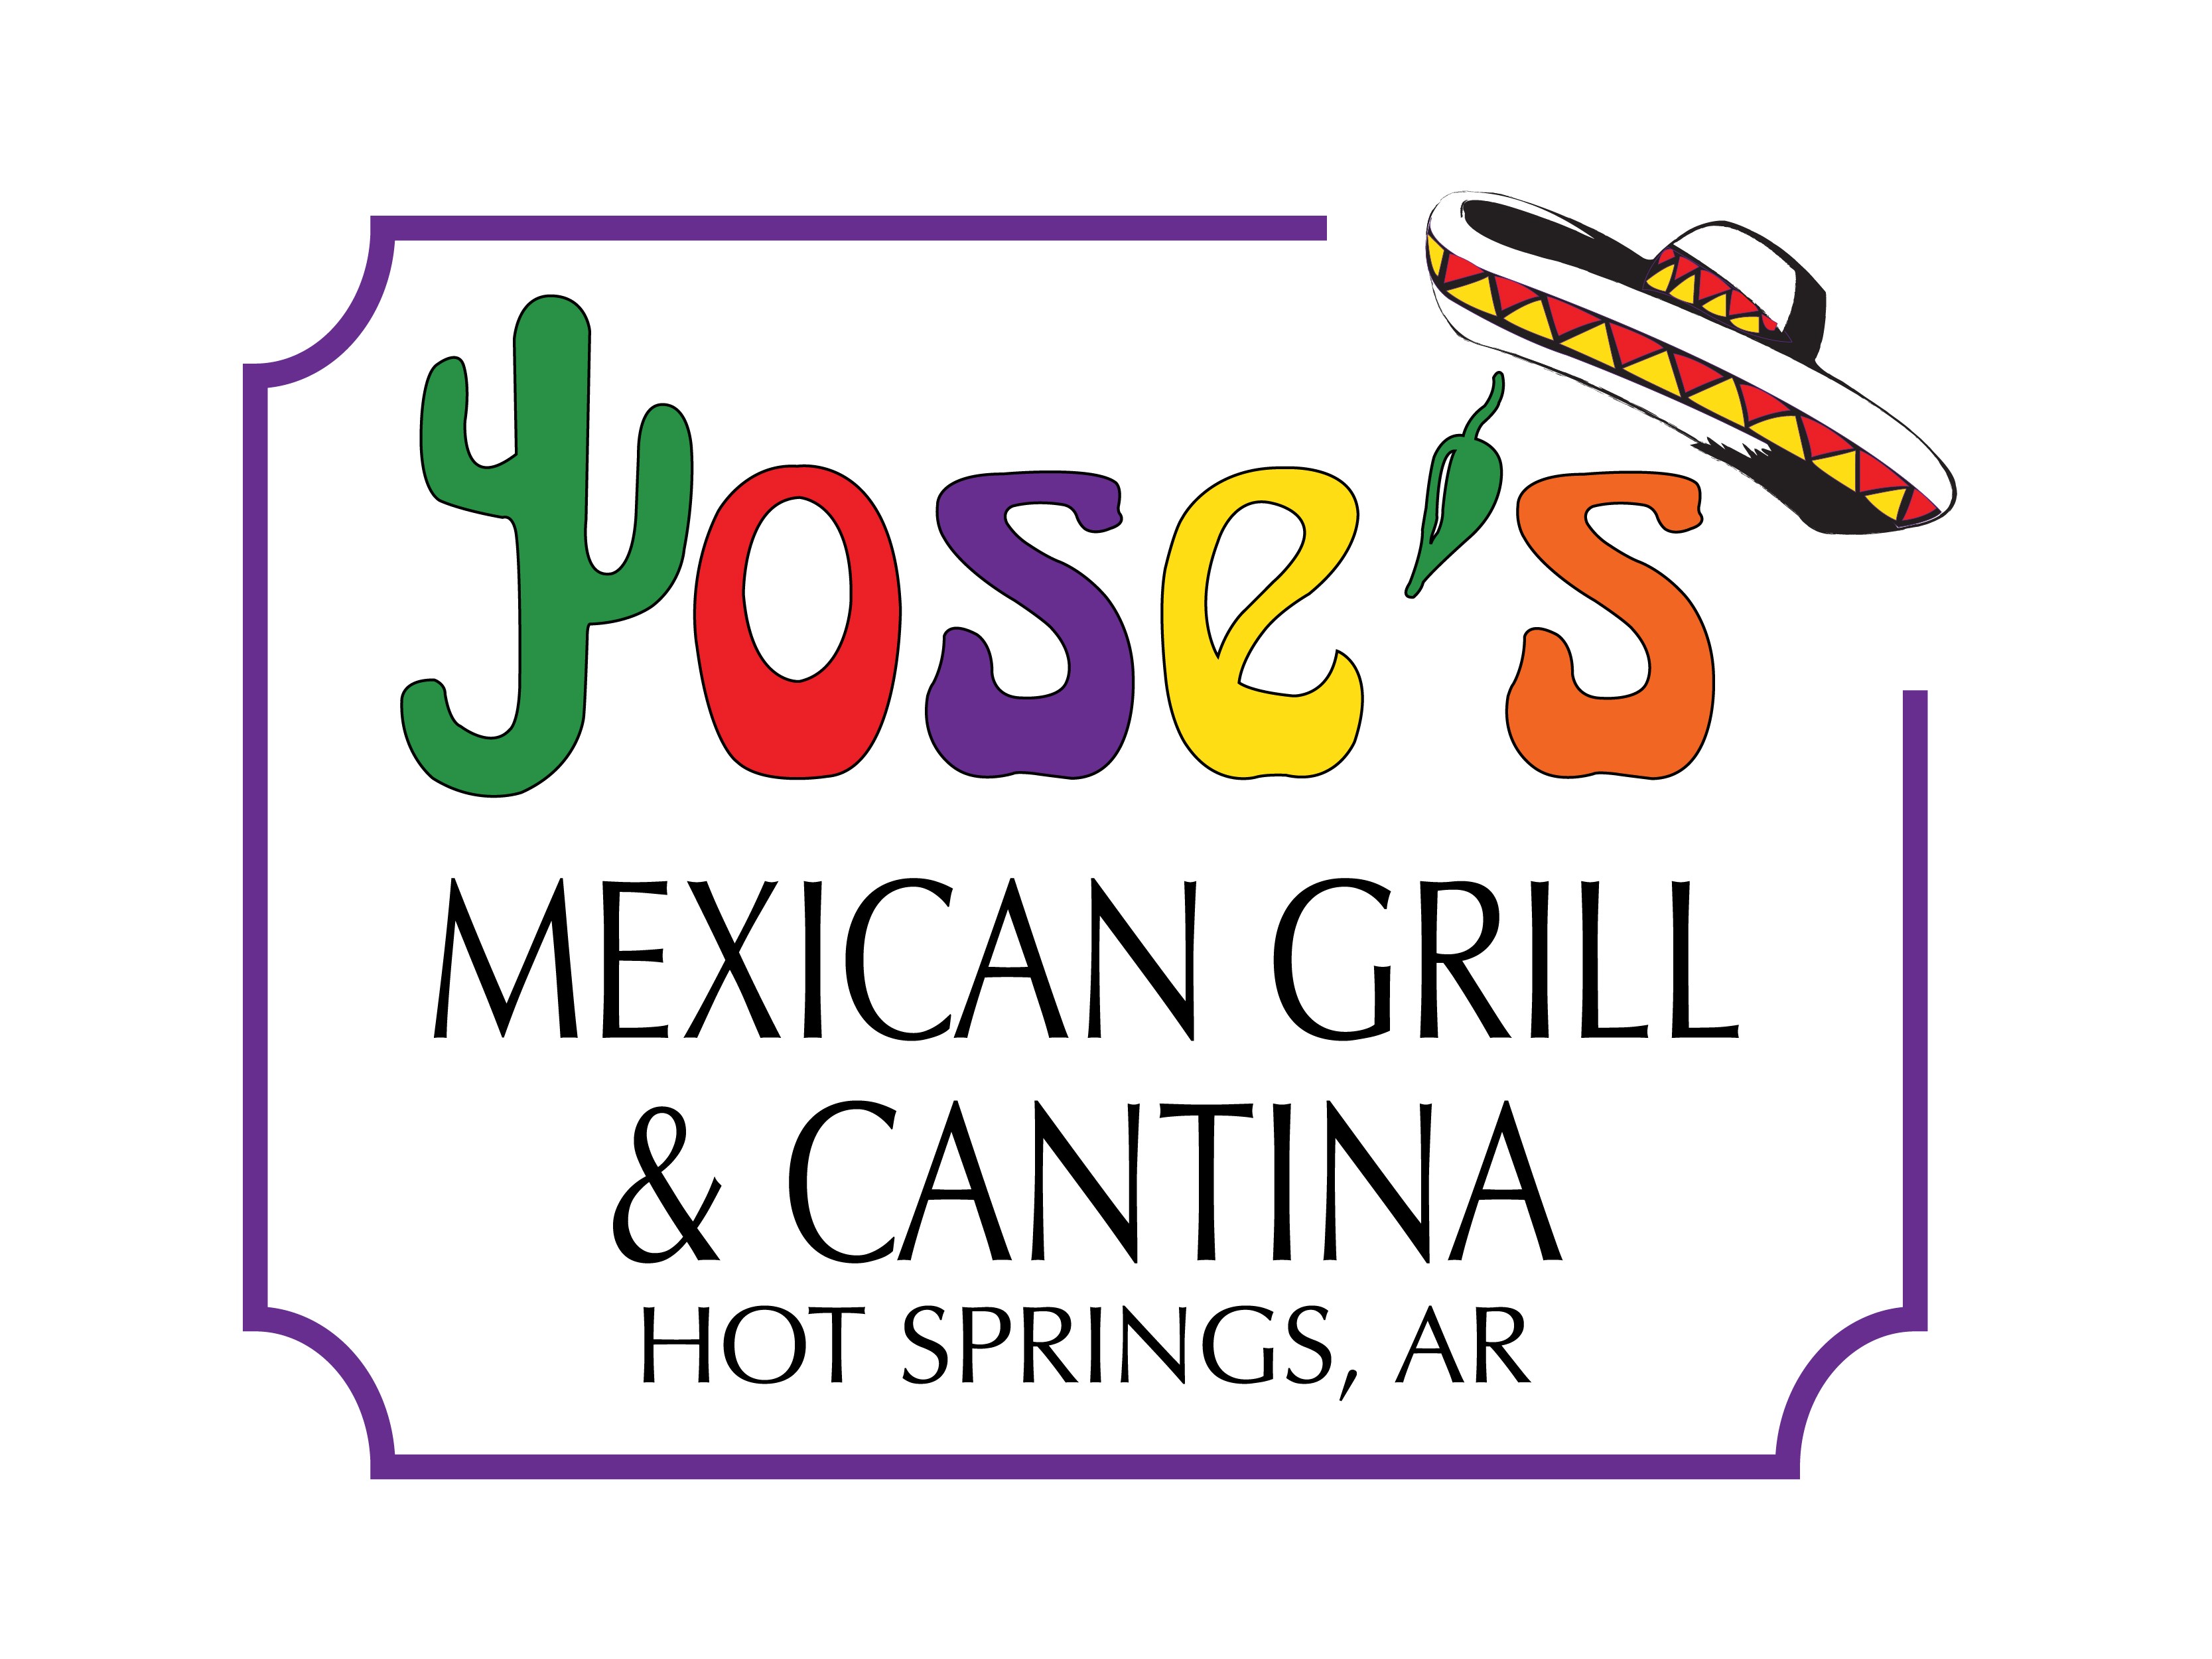 Jose's Mexican Grill and Cantina - MALVERN AVE